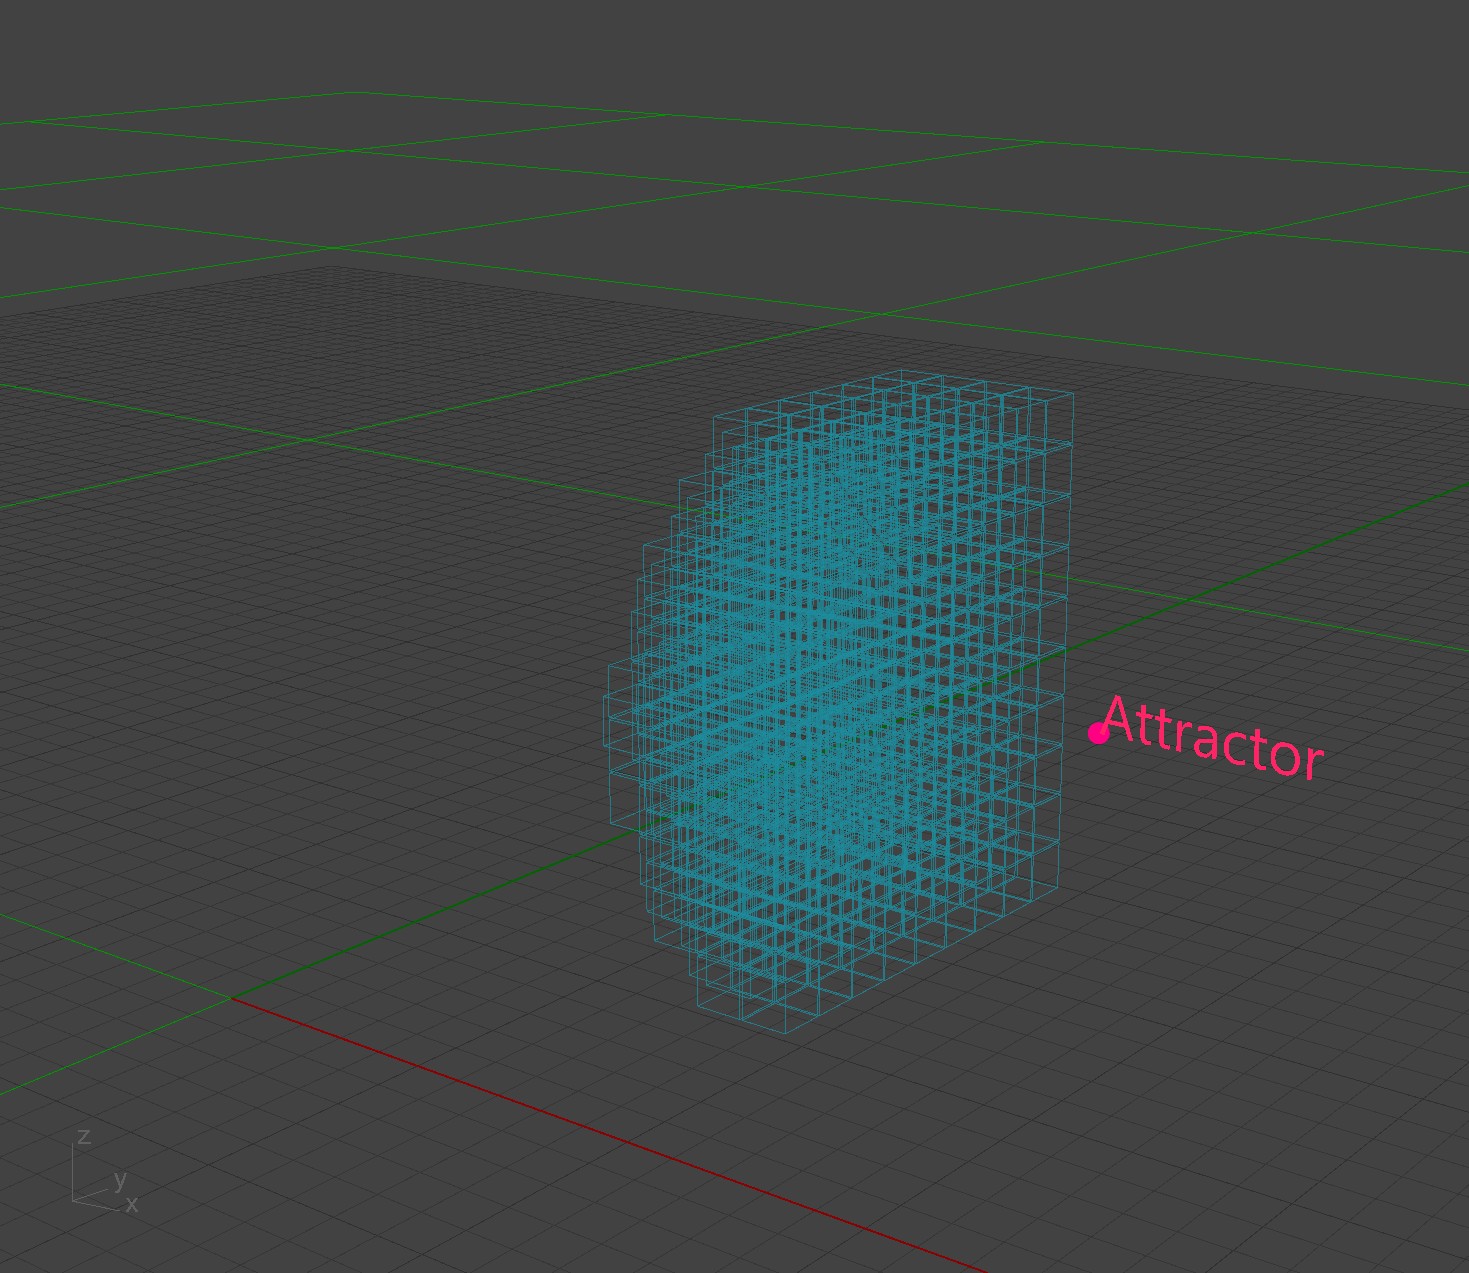 Allowing / Disallowing Modules based on attractor - All